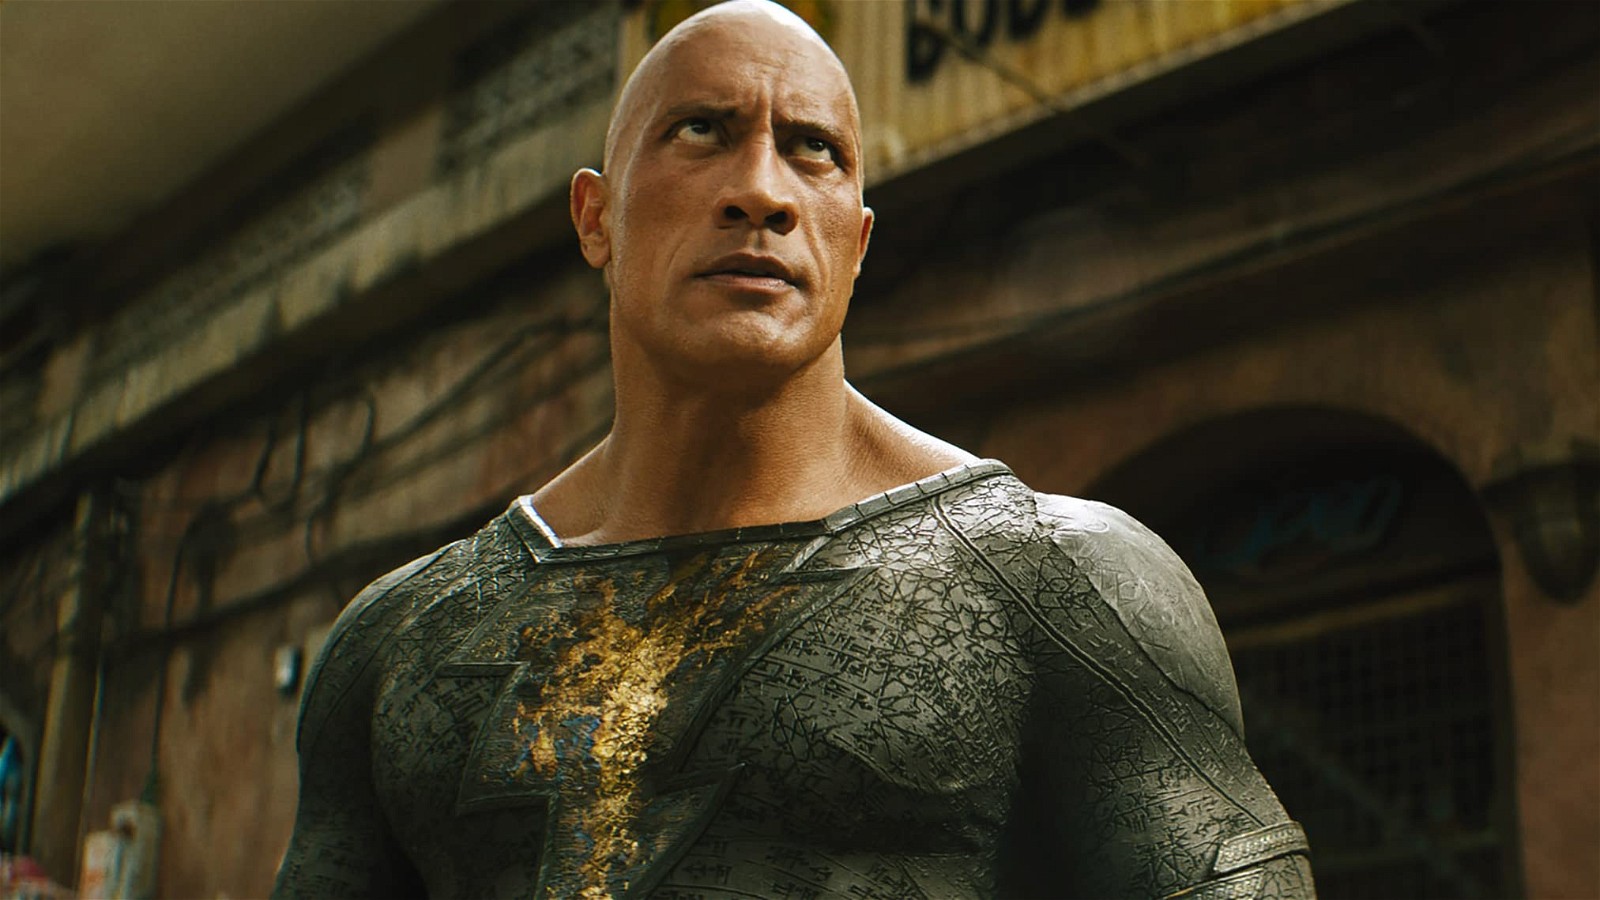 Dwayne Johnson in an action sequence in Black Adam